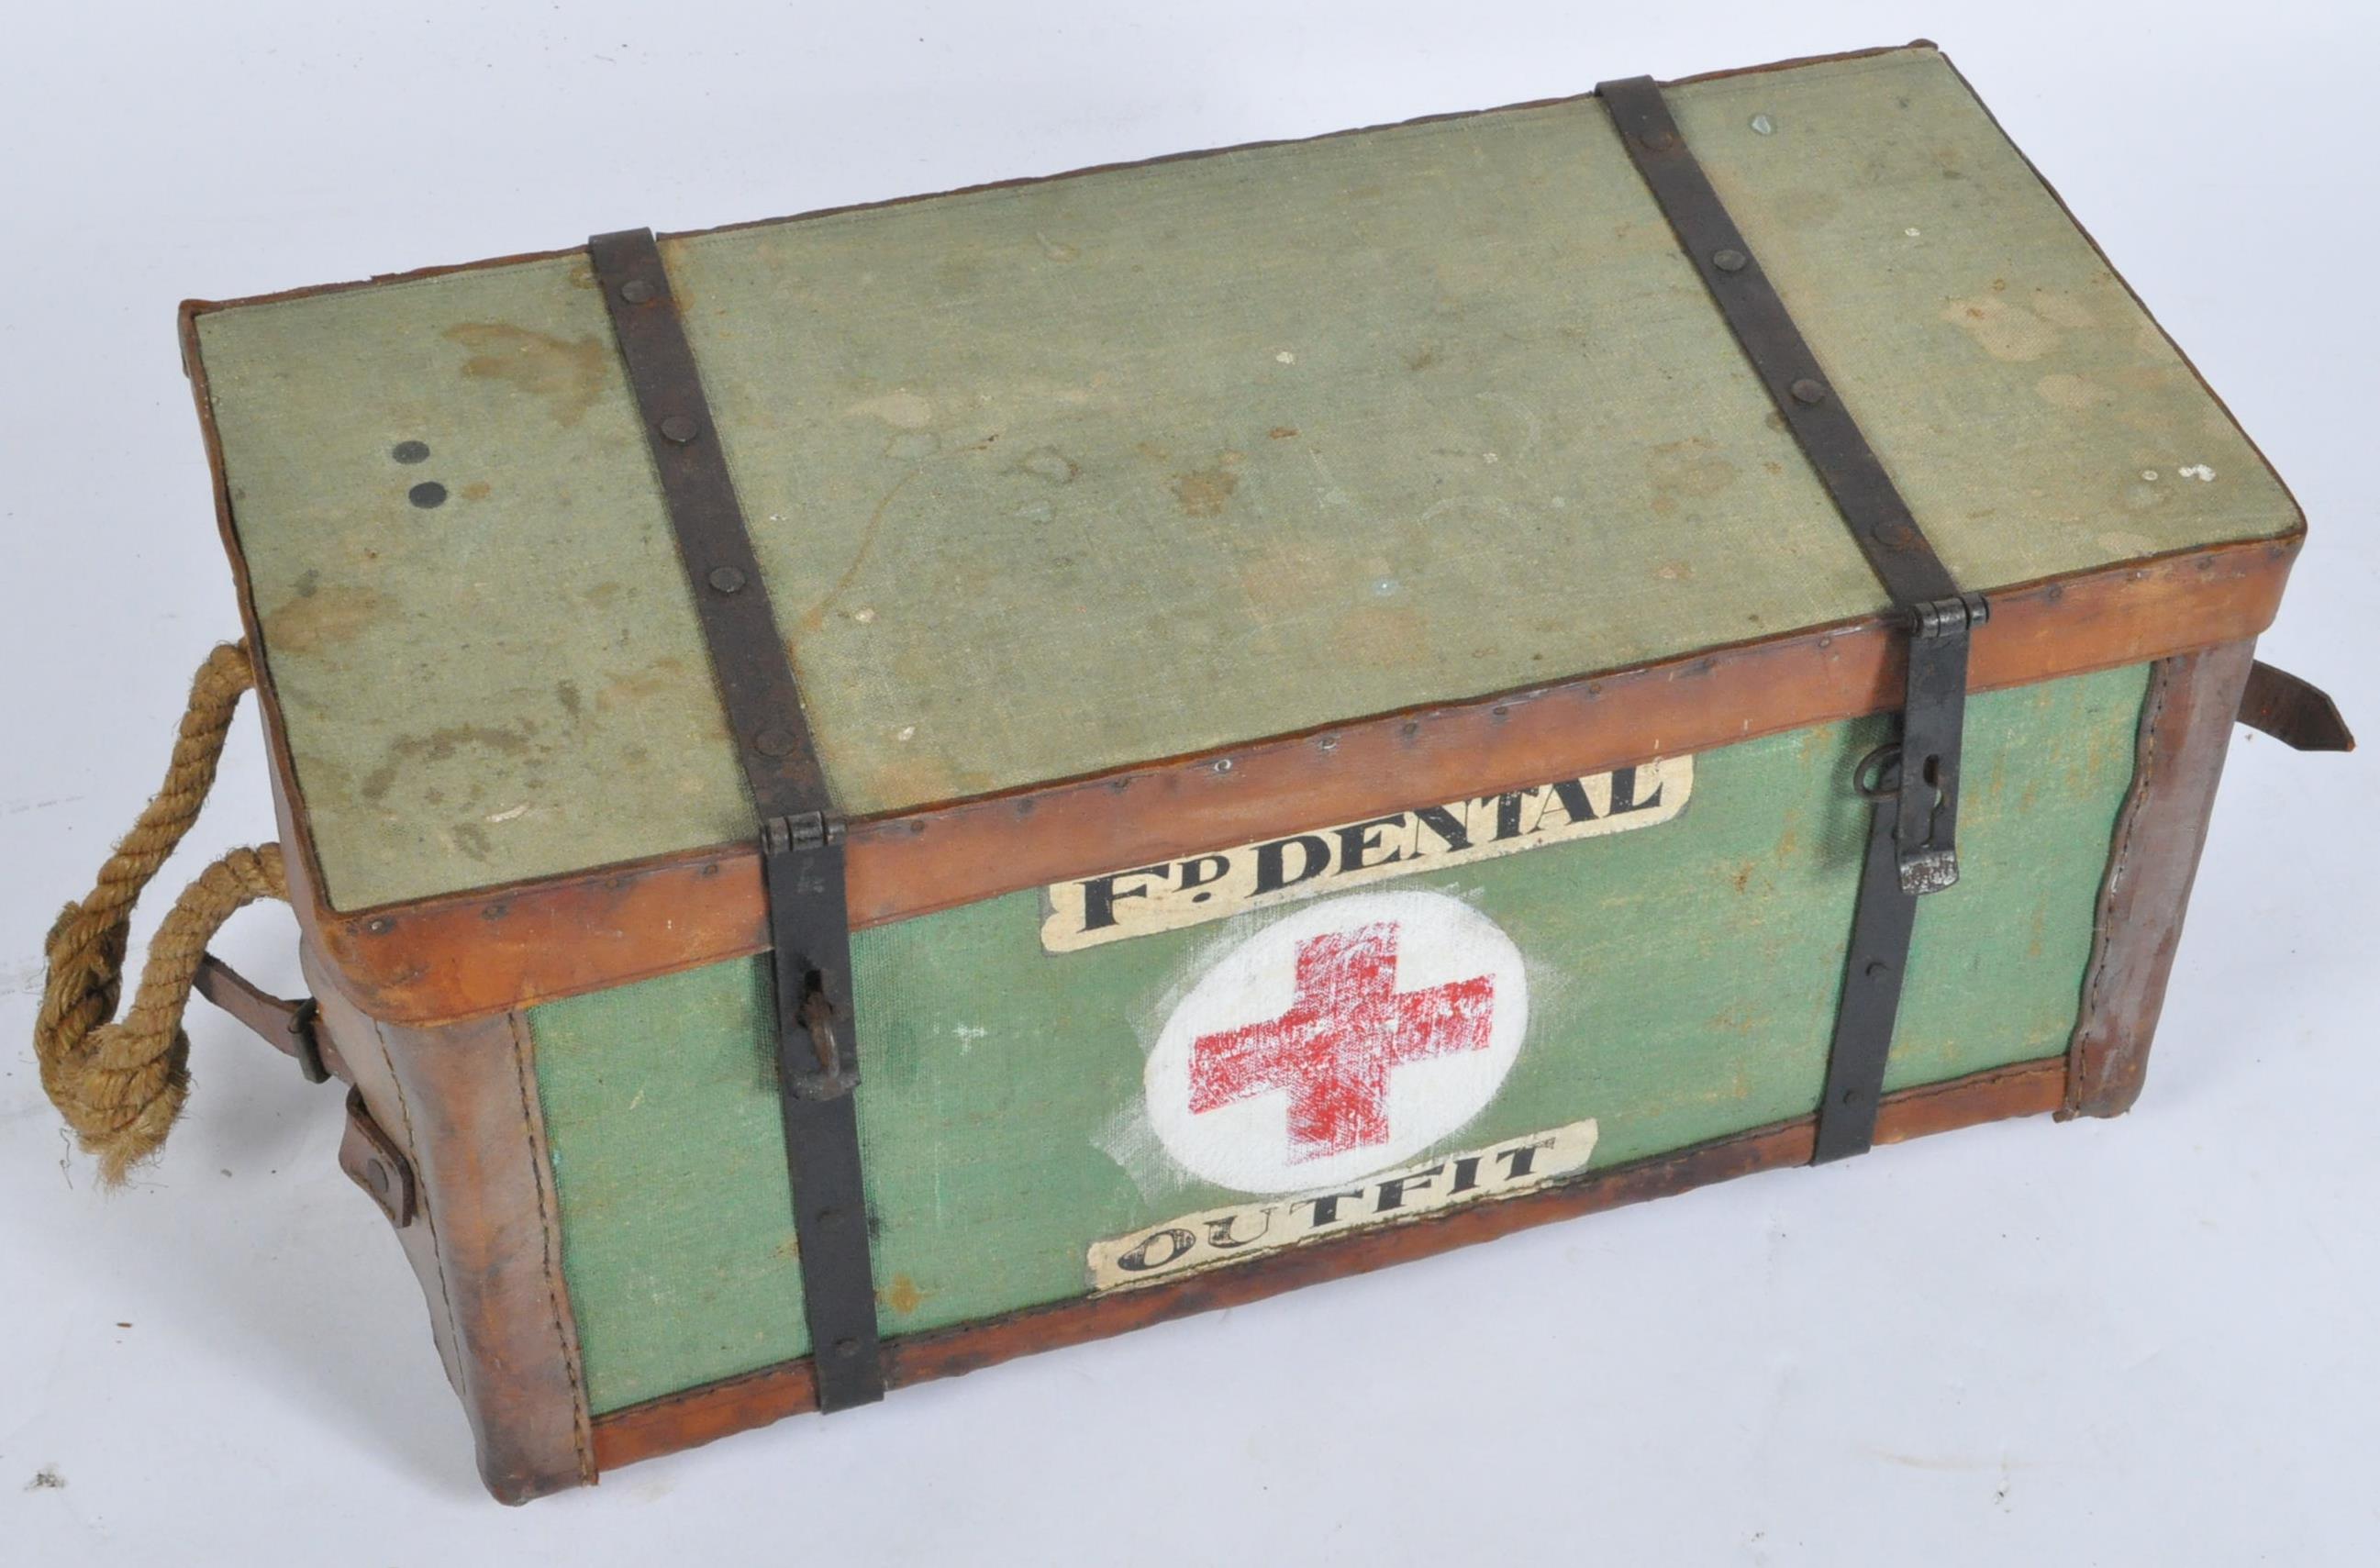 WWII SECOND WORLD WAR FIRST AID ' DENTAL OUTFIT ' AIR DROP BOX - Image 2 of 4